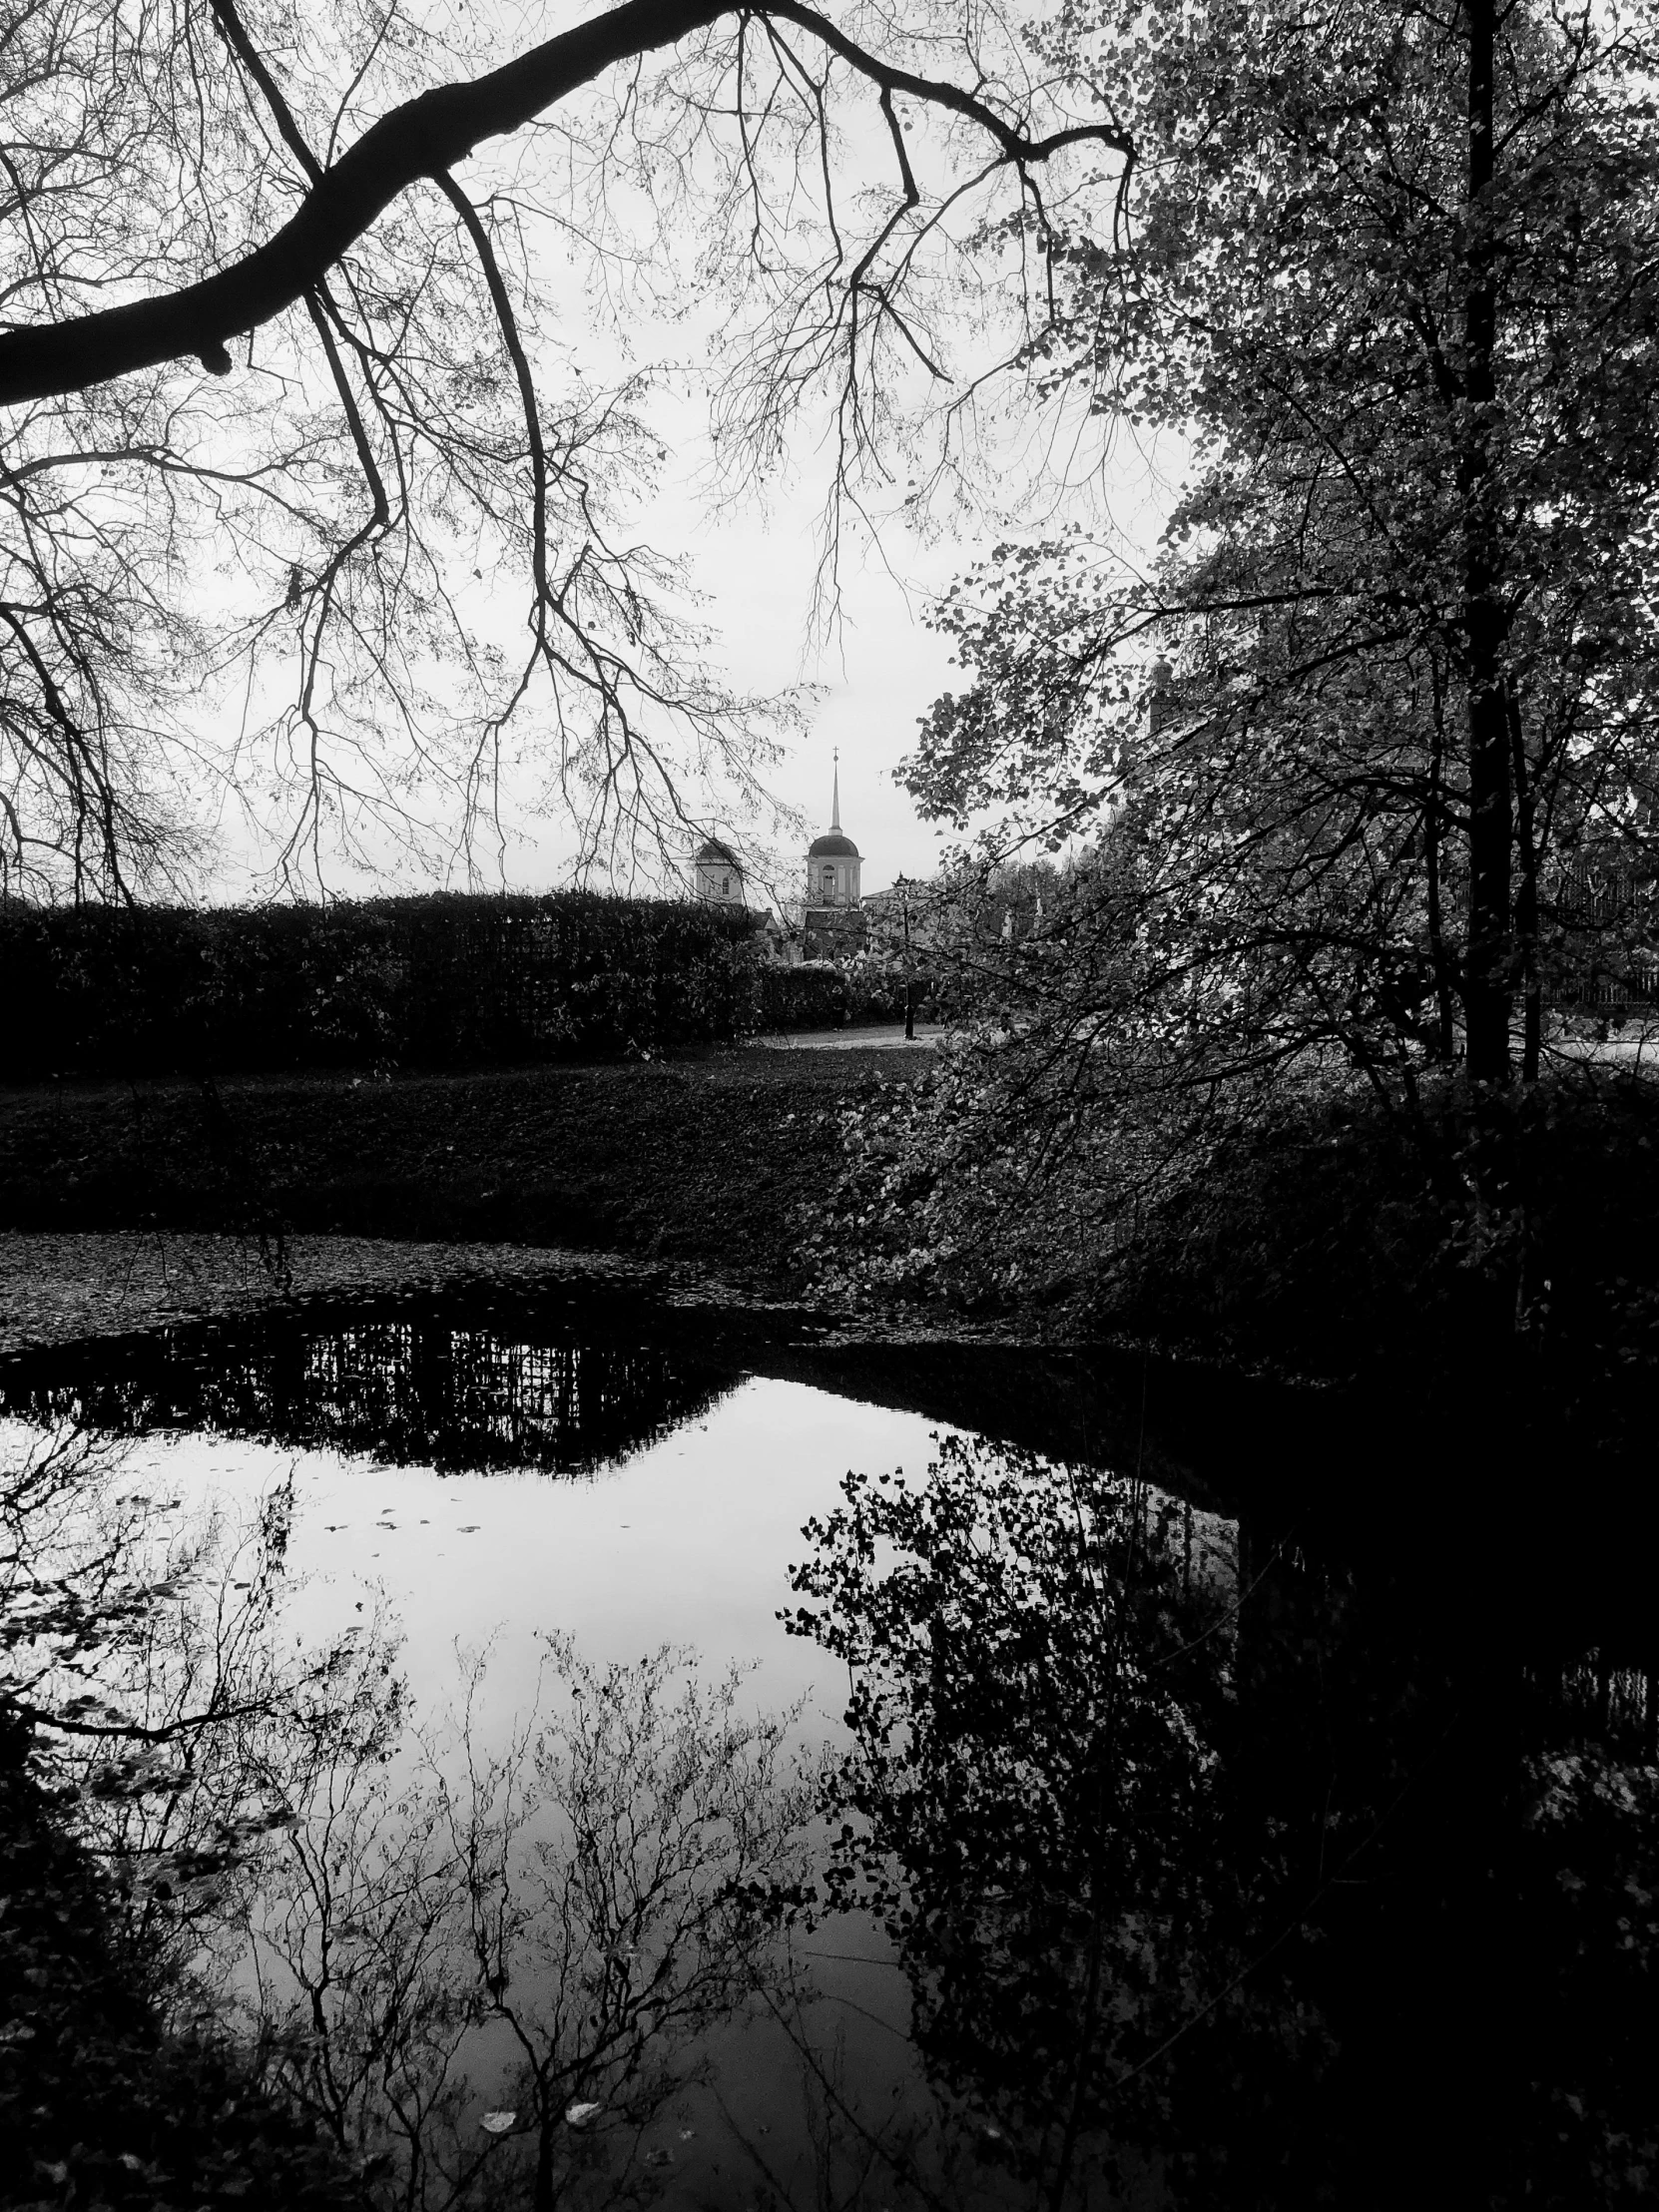 a black and white photo of a pond surrounded by trees, by Andrew Bell, land art, with castle in distance, reflect photograph, tri - x pan stock, 1981 photograph